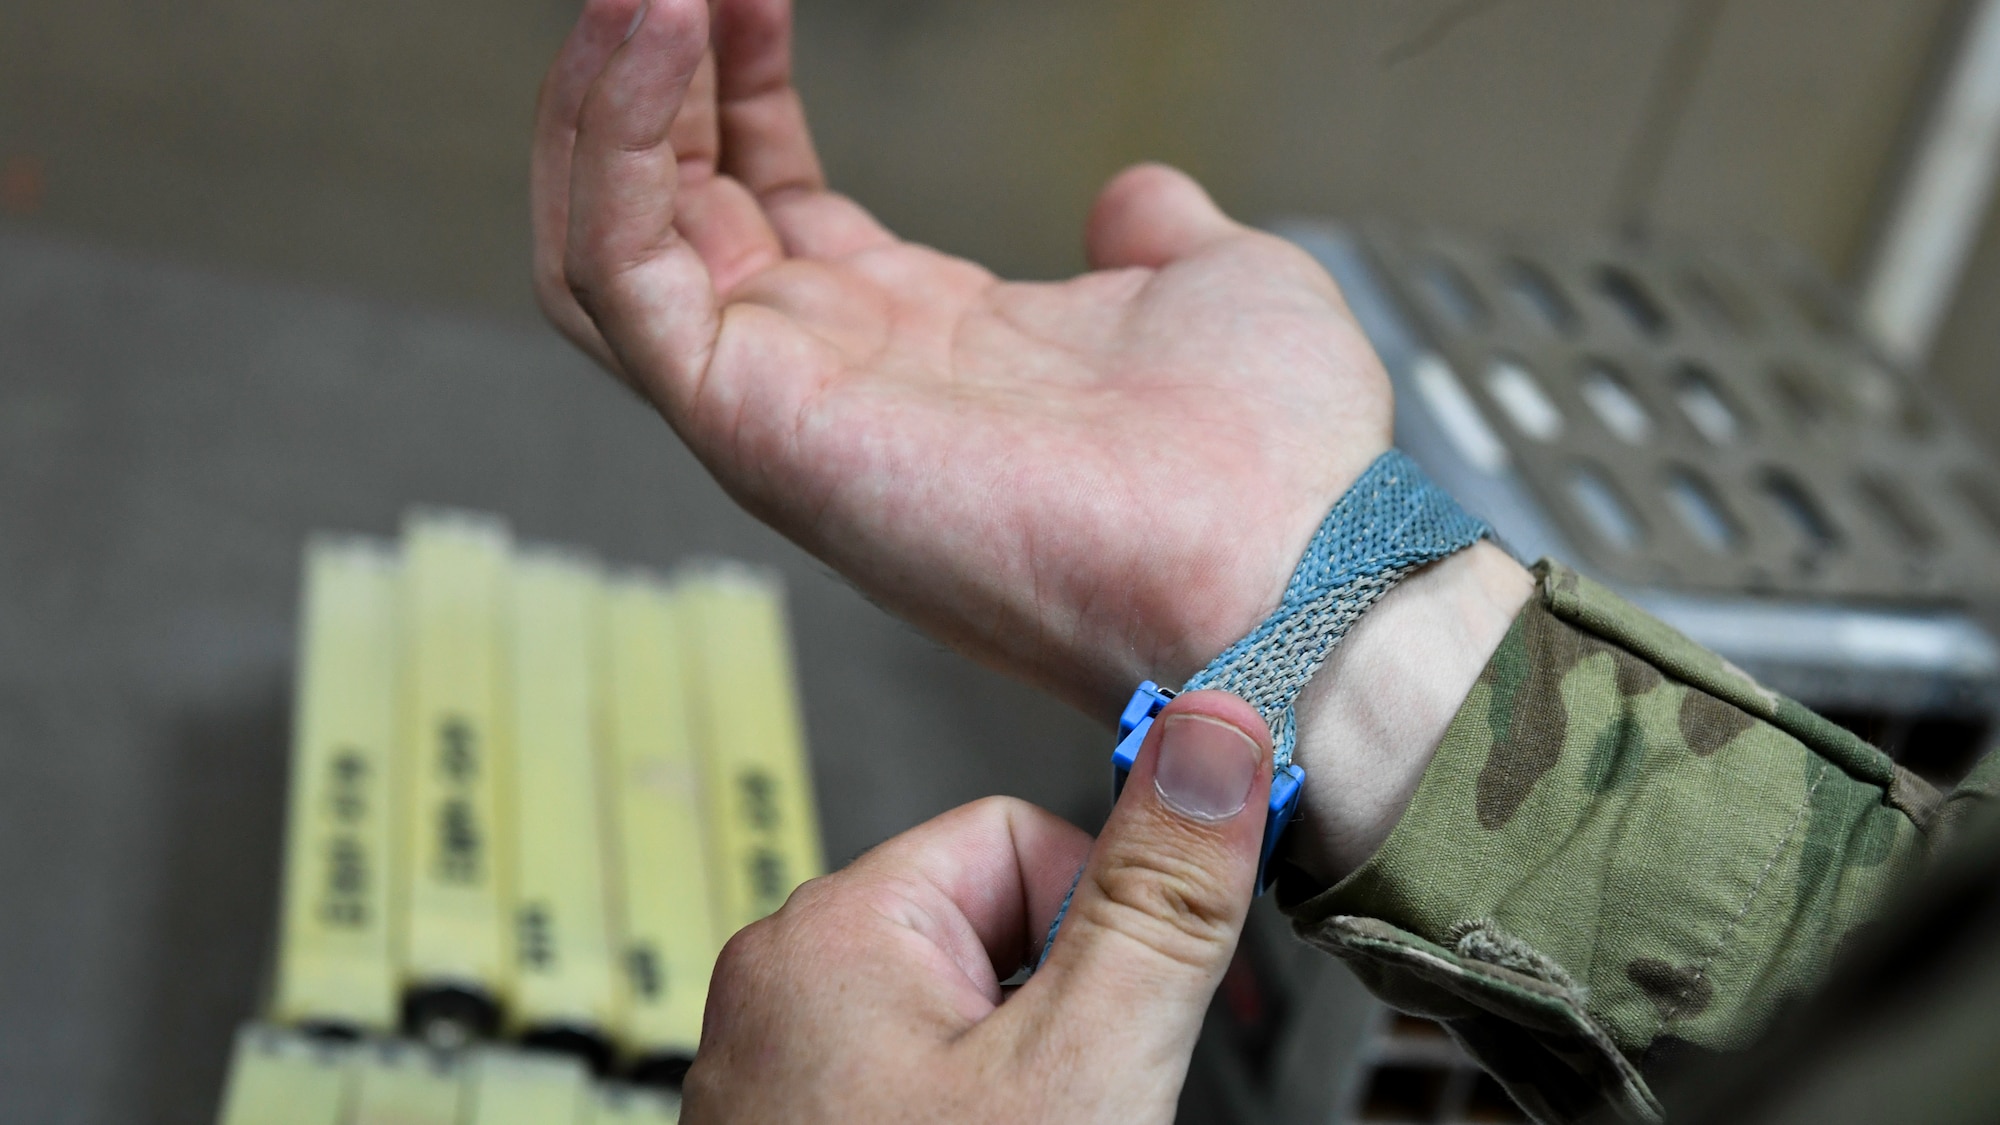 U.S. Air Force Airman 1st Class Conner Quintana, 386th Expeditionary Maintenance Squadron munitions technician journeyman, straps on a static electricity band before working with aircraft flares at Ali Al Salem Air Base, Kuwait, July 18, 2019. Anti-static armbands are used to prevent accidental activation of flares during the maintenance process. (U.S. Air Force photo by Staff. Sgt. Mozer O. Da Cunha)